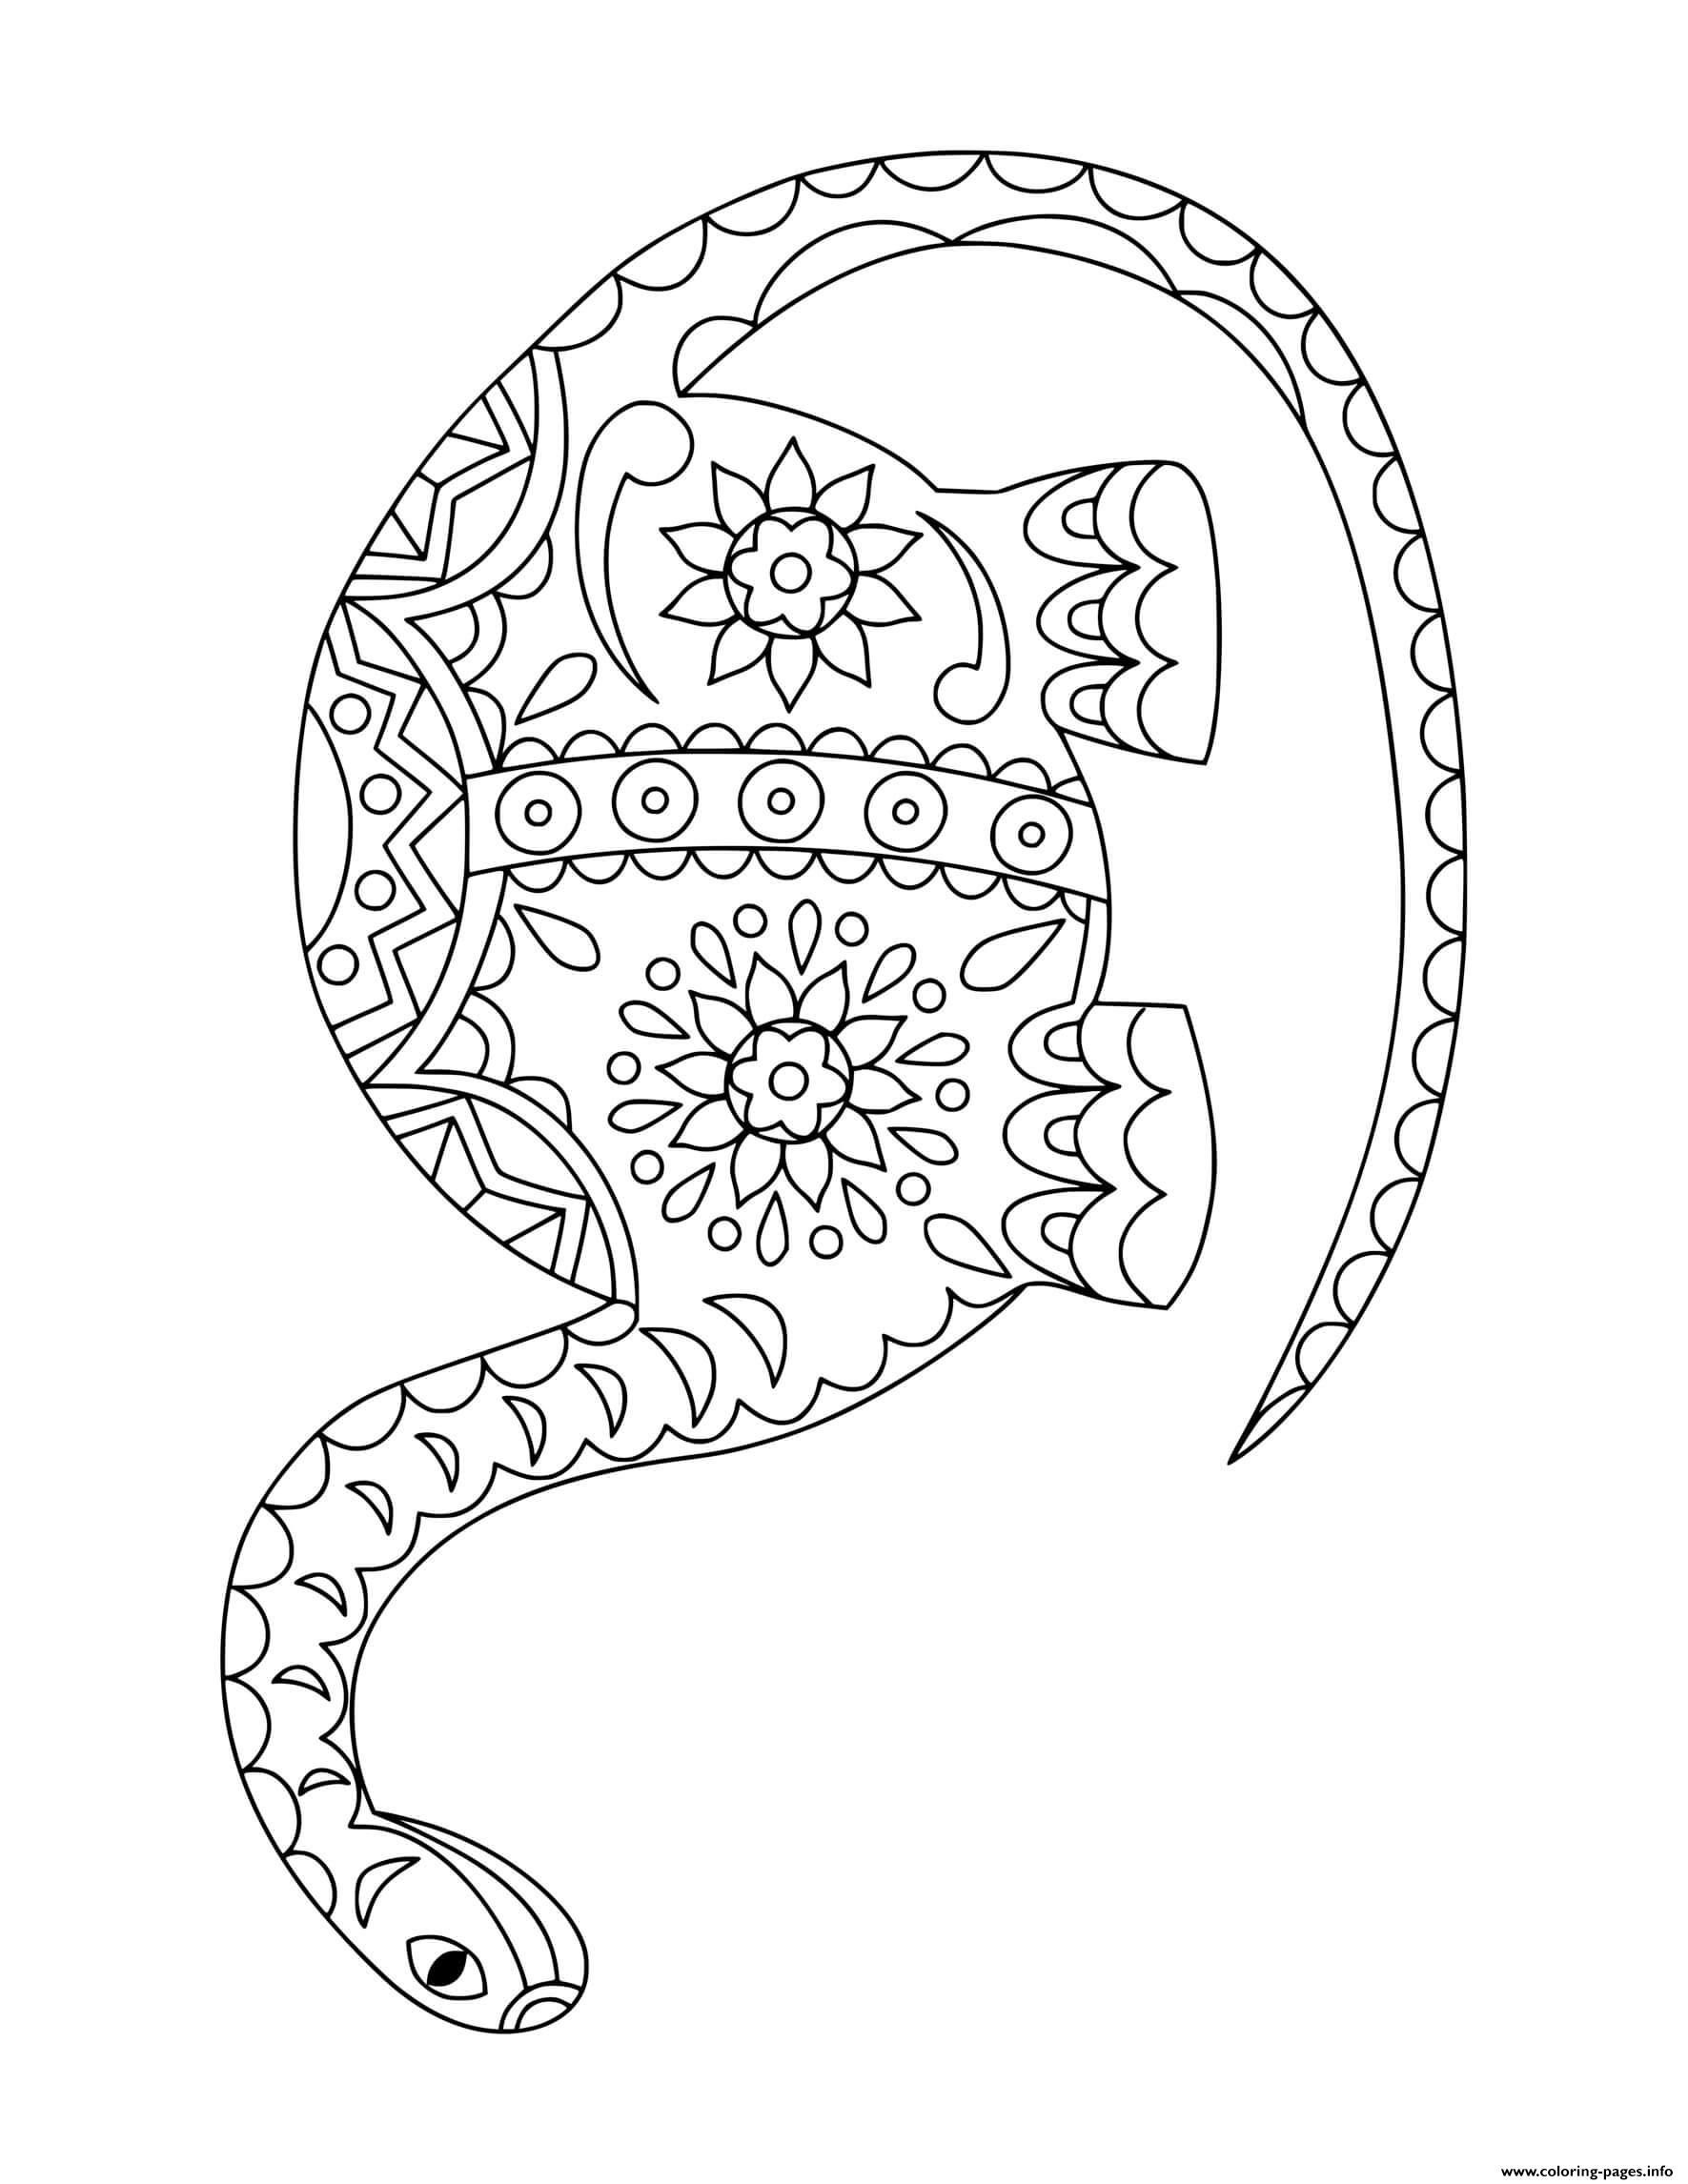 Dinosaur Intricate Pattern Doodle For Adults Coloring Pages Printable